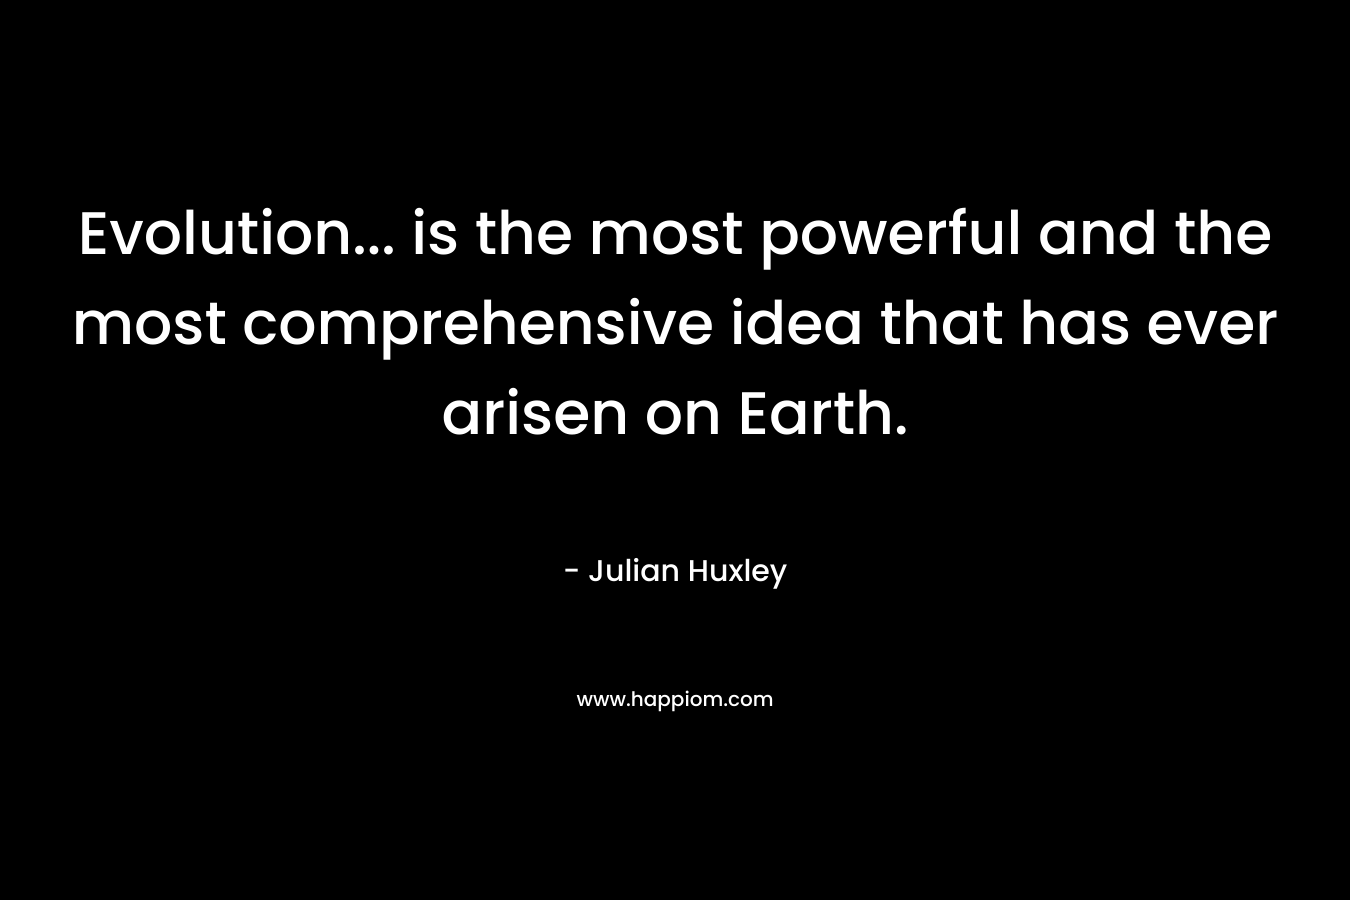 Evolution… is the most powerful and the most comprehensive idea that has ever arisen on Earth. – Julian Huxley